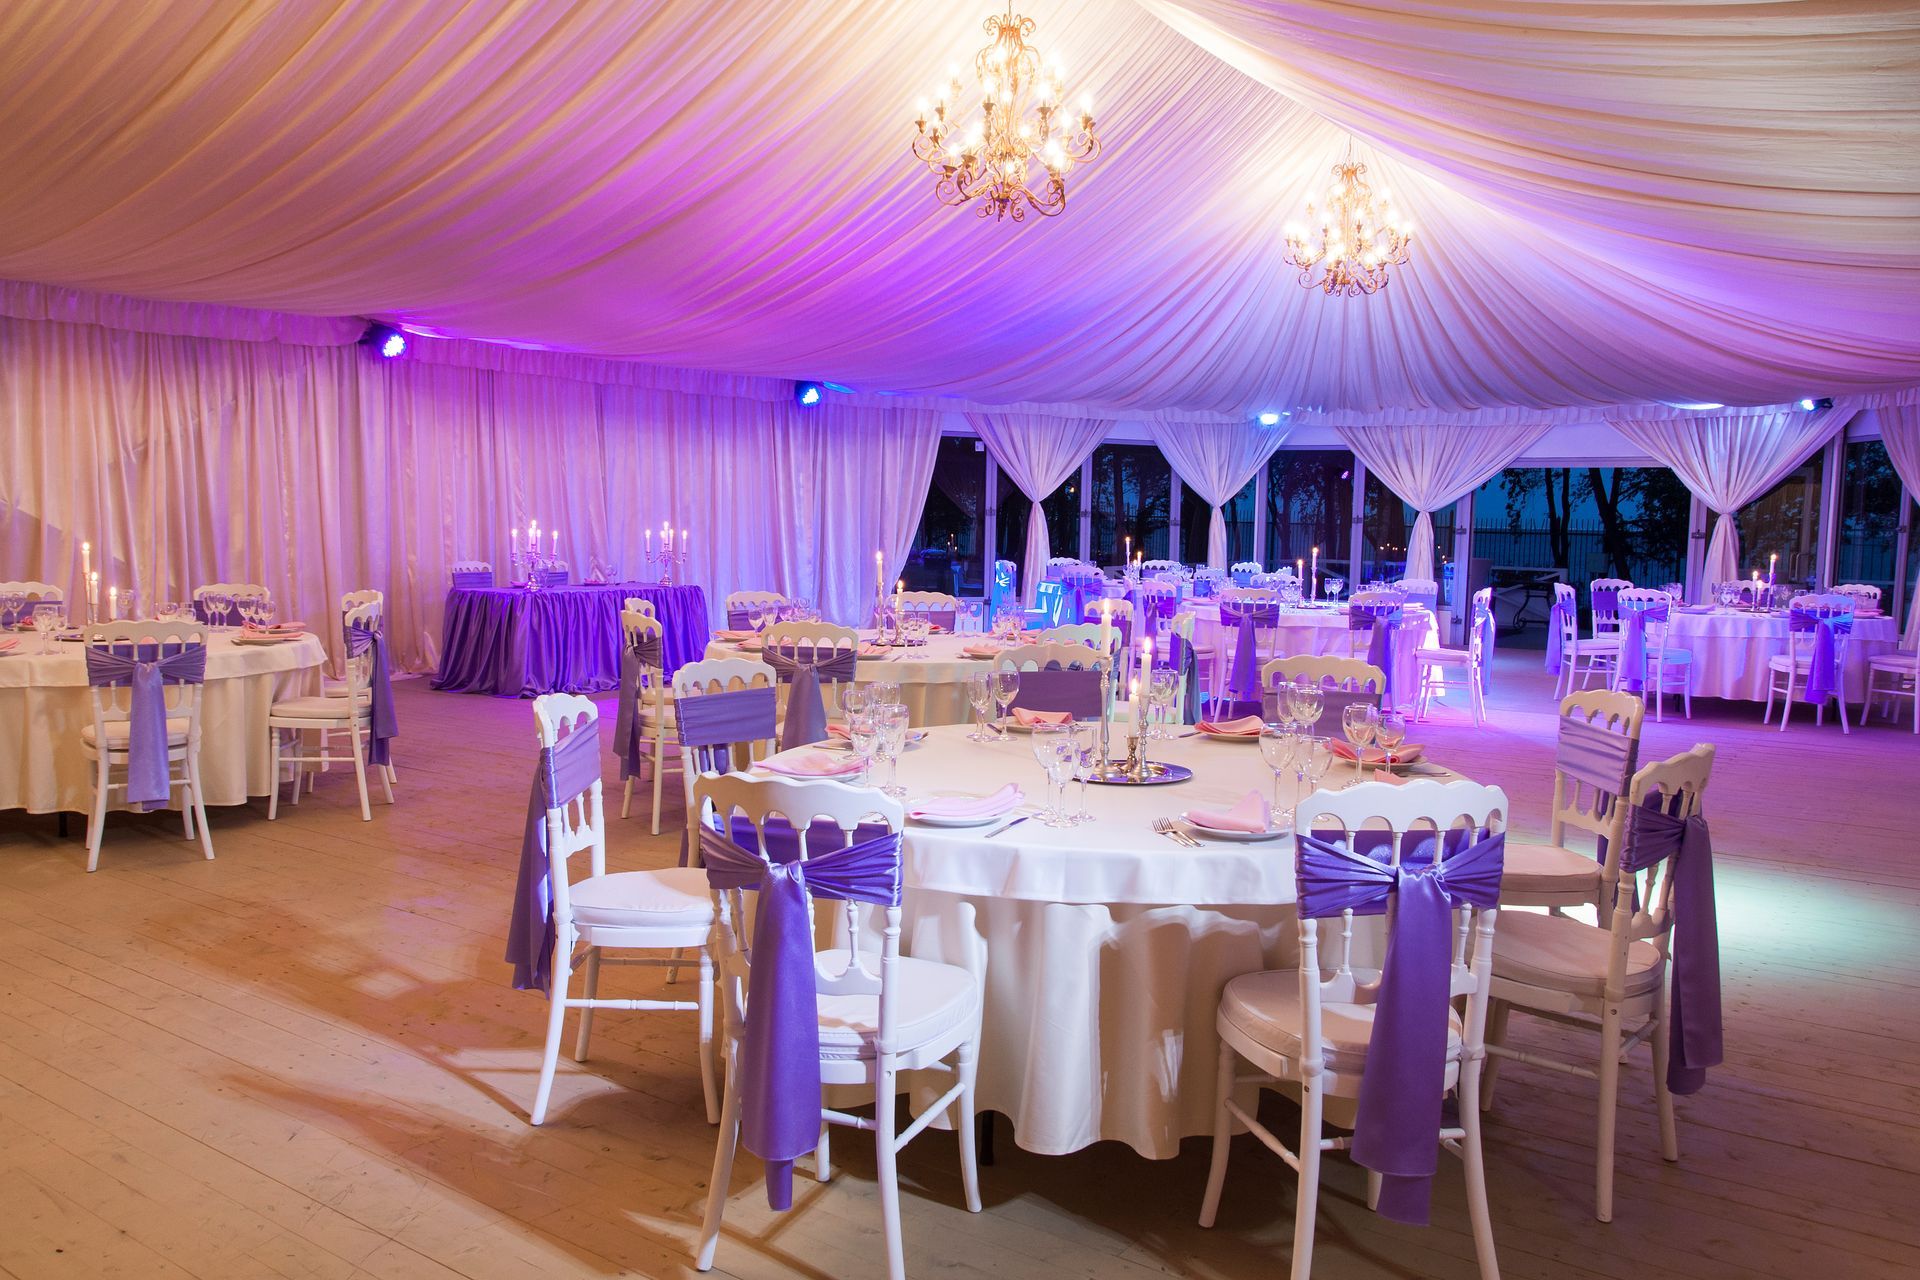 A summer tent with illumination on the wedding day.